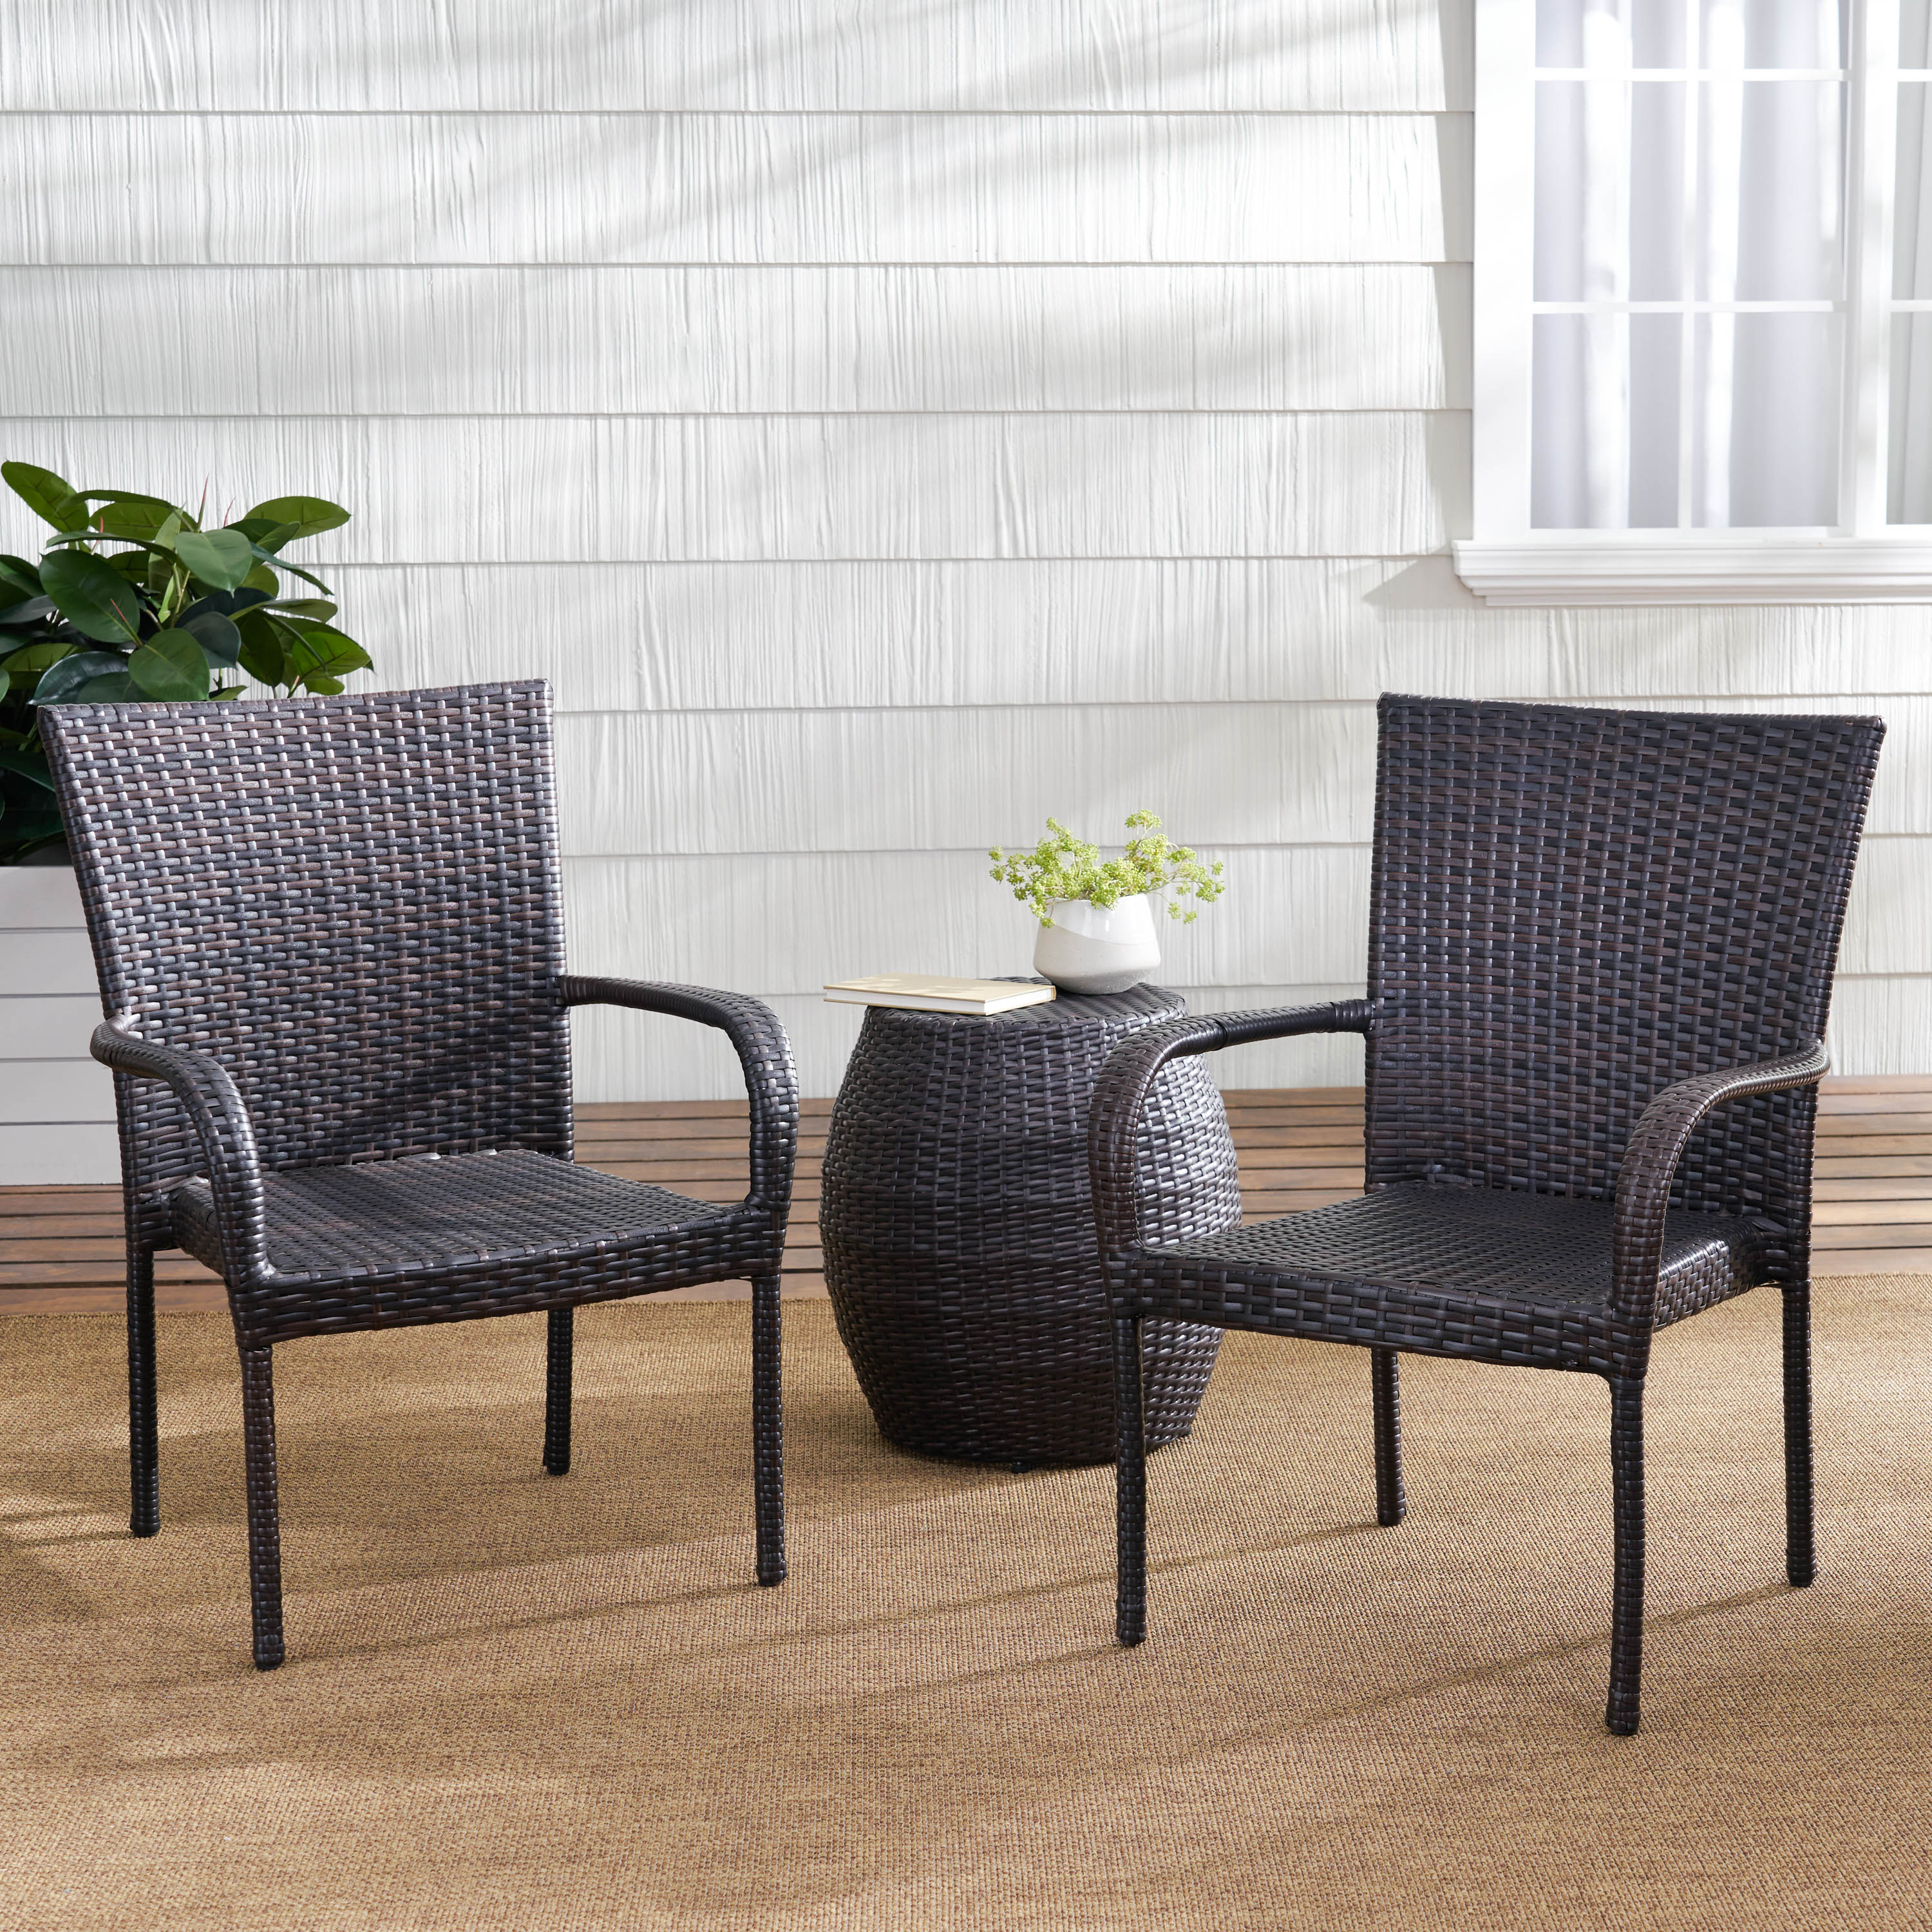 Cascada Outdoor 3 Piece Wicker Chat Set with Straight Back Chair, Multibrown - image 2 of 8